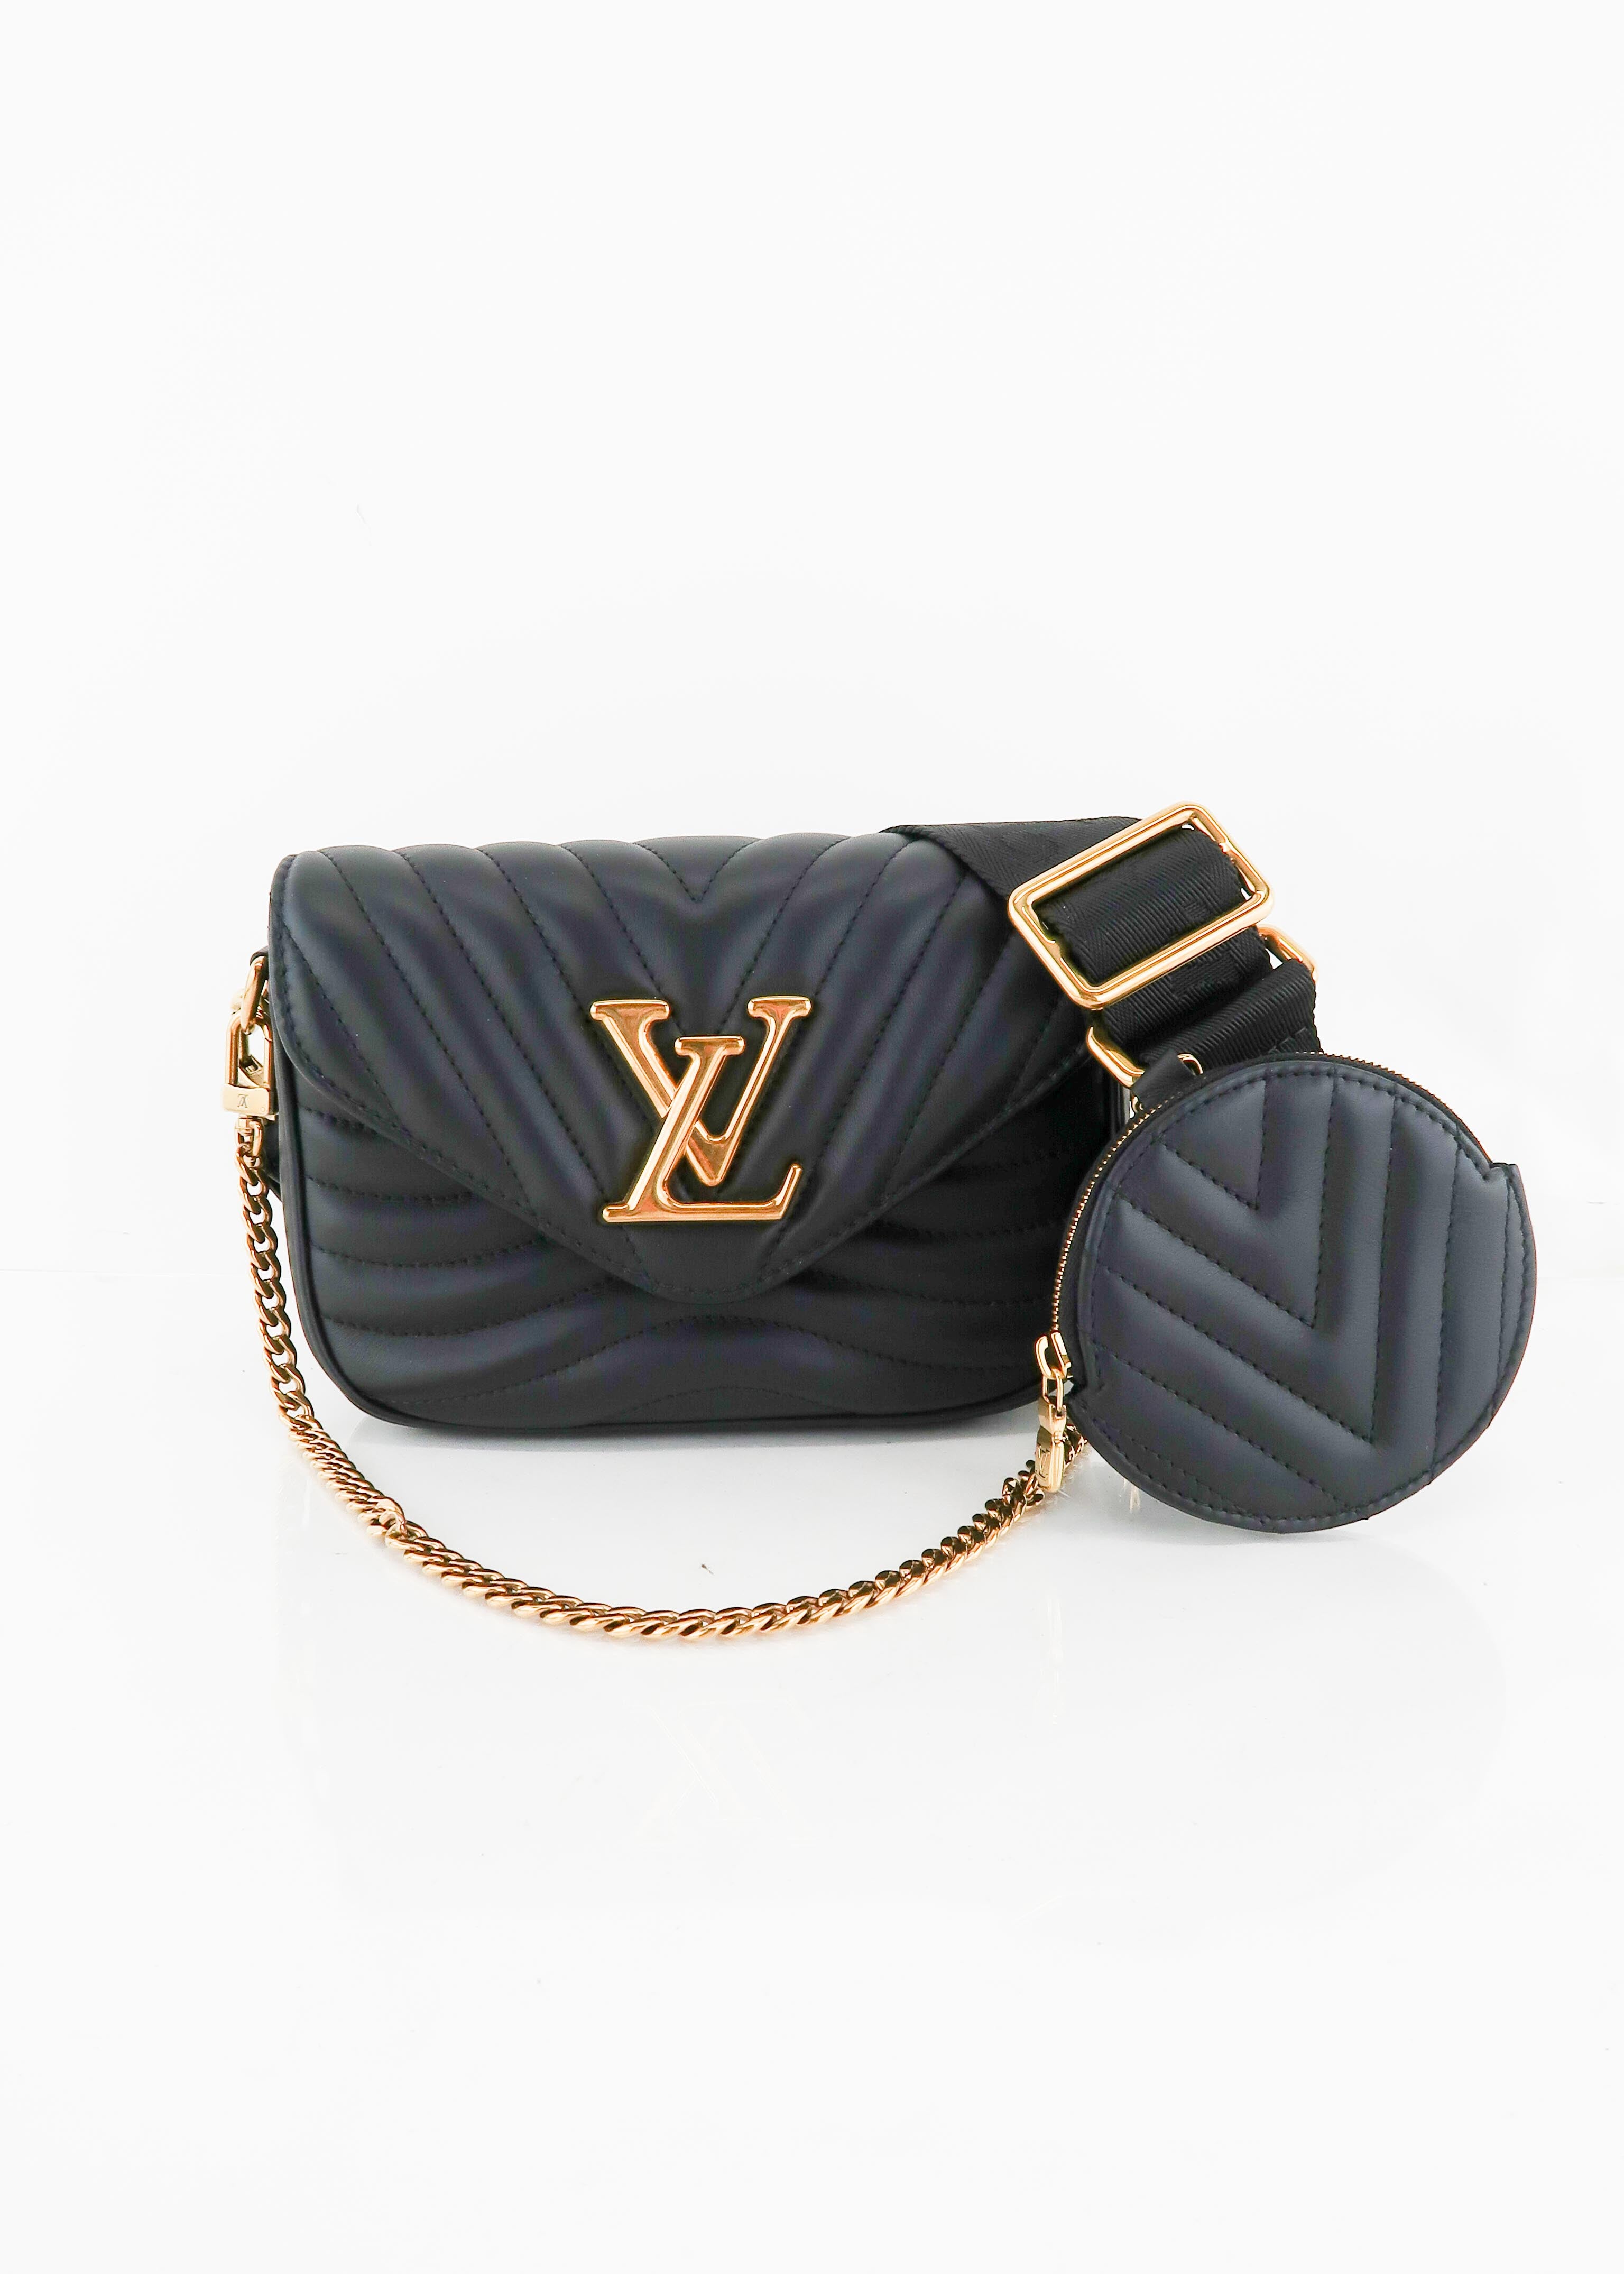 Pin by Em 💋 on *LET'S GET ORGANIZED*+ *  Louis vuitton handbags black, Louis  vuitton, Louis vuitton handbags